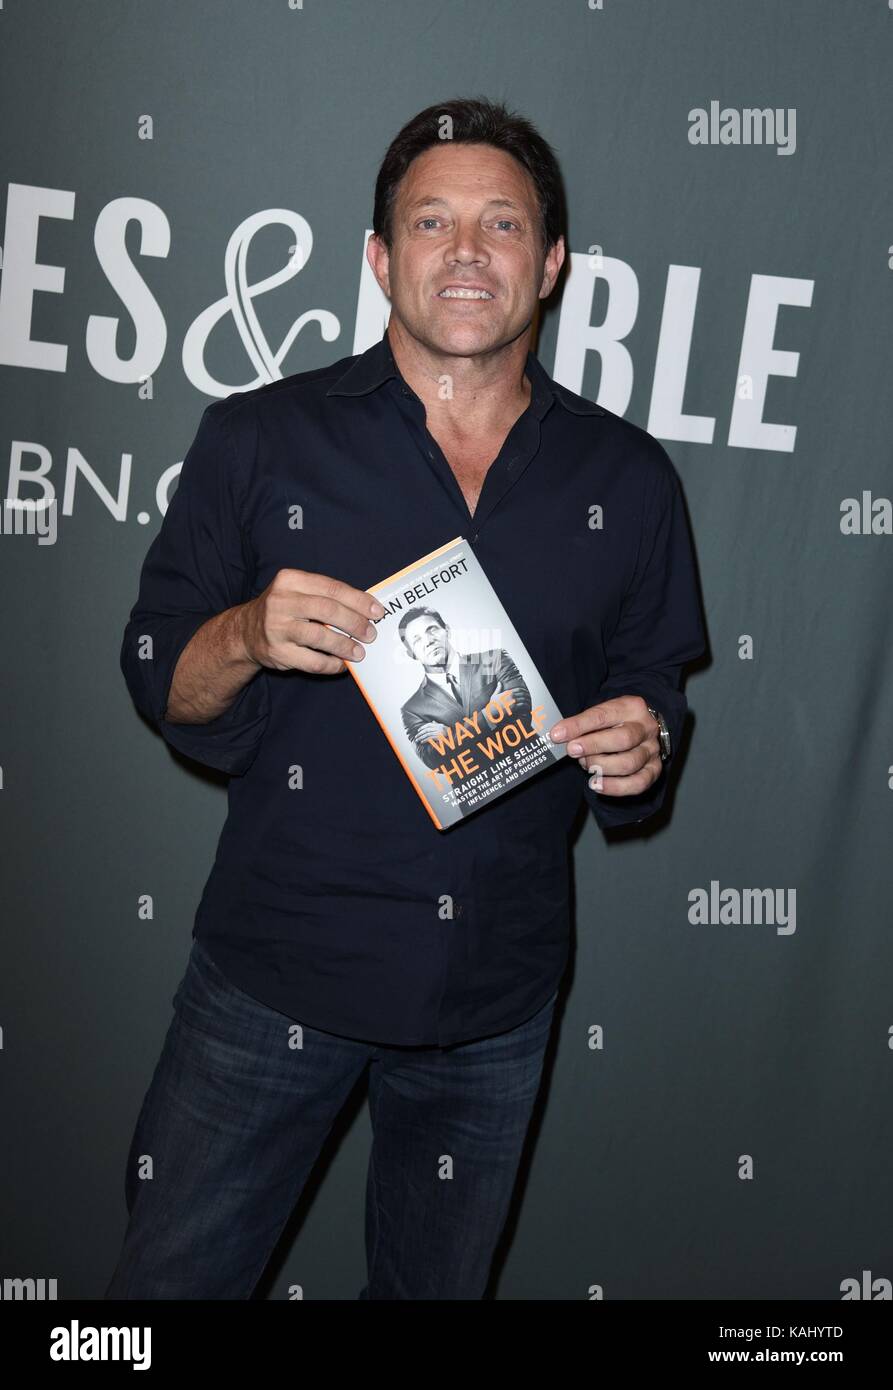 New York, NY, USA. 26th Sep, 2017. Jordan Belfort at in-store appearance for Jordan Belfort Book for WAY OF THE WOLF, Barnes and Noble Book Store, New York, NY 26,